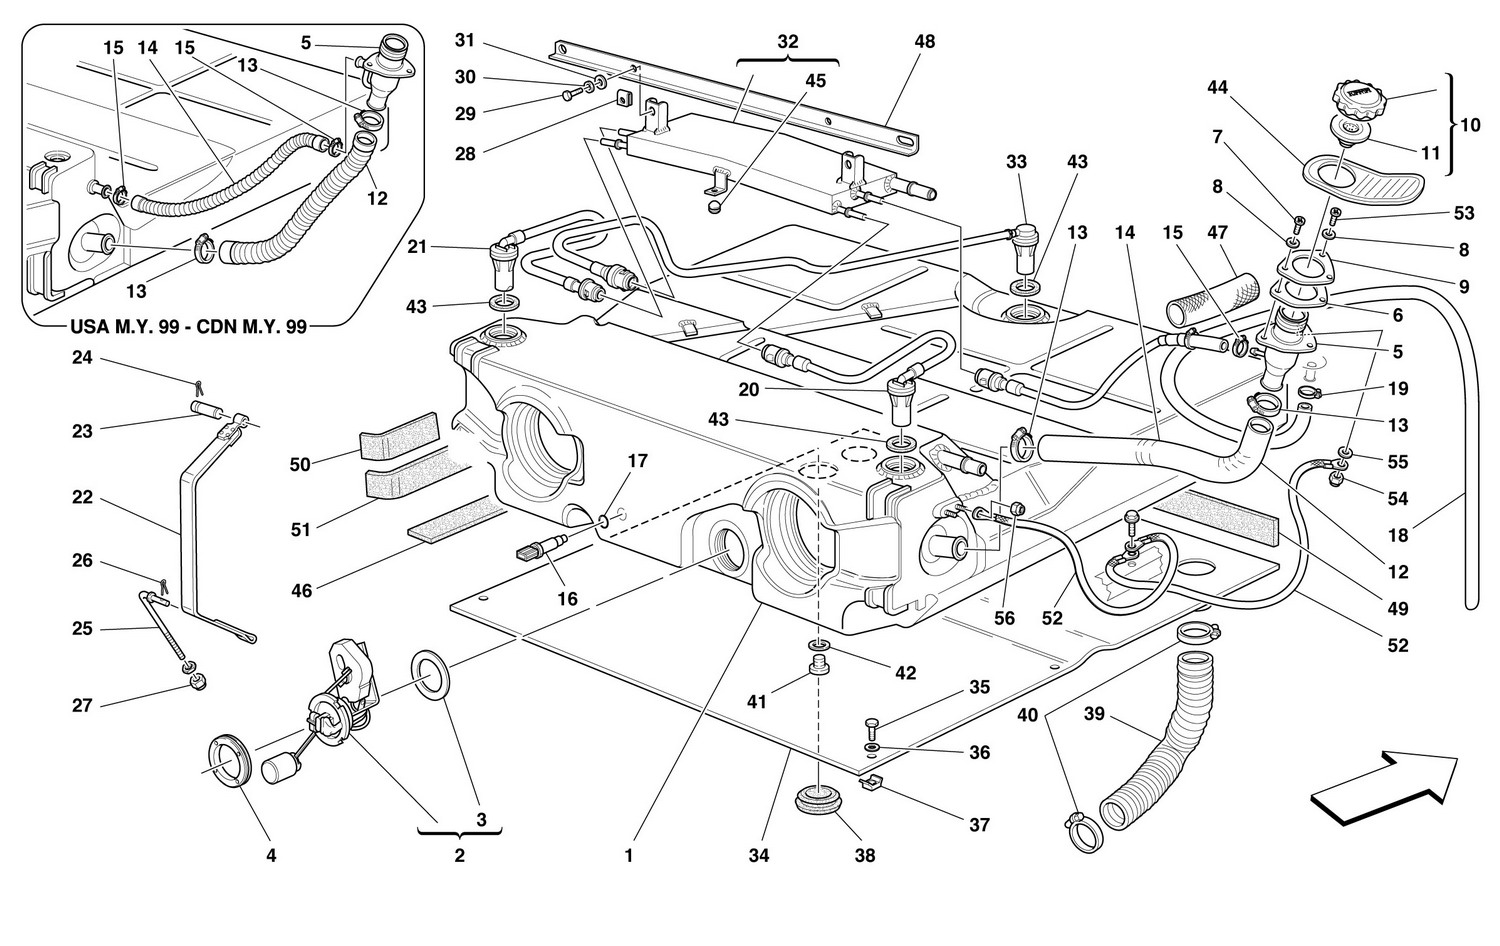 Schematic: Fuel Tank -Valid For Usa And Cdn M.Y. 99 & 2000-